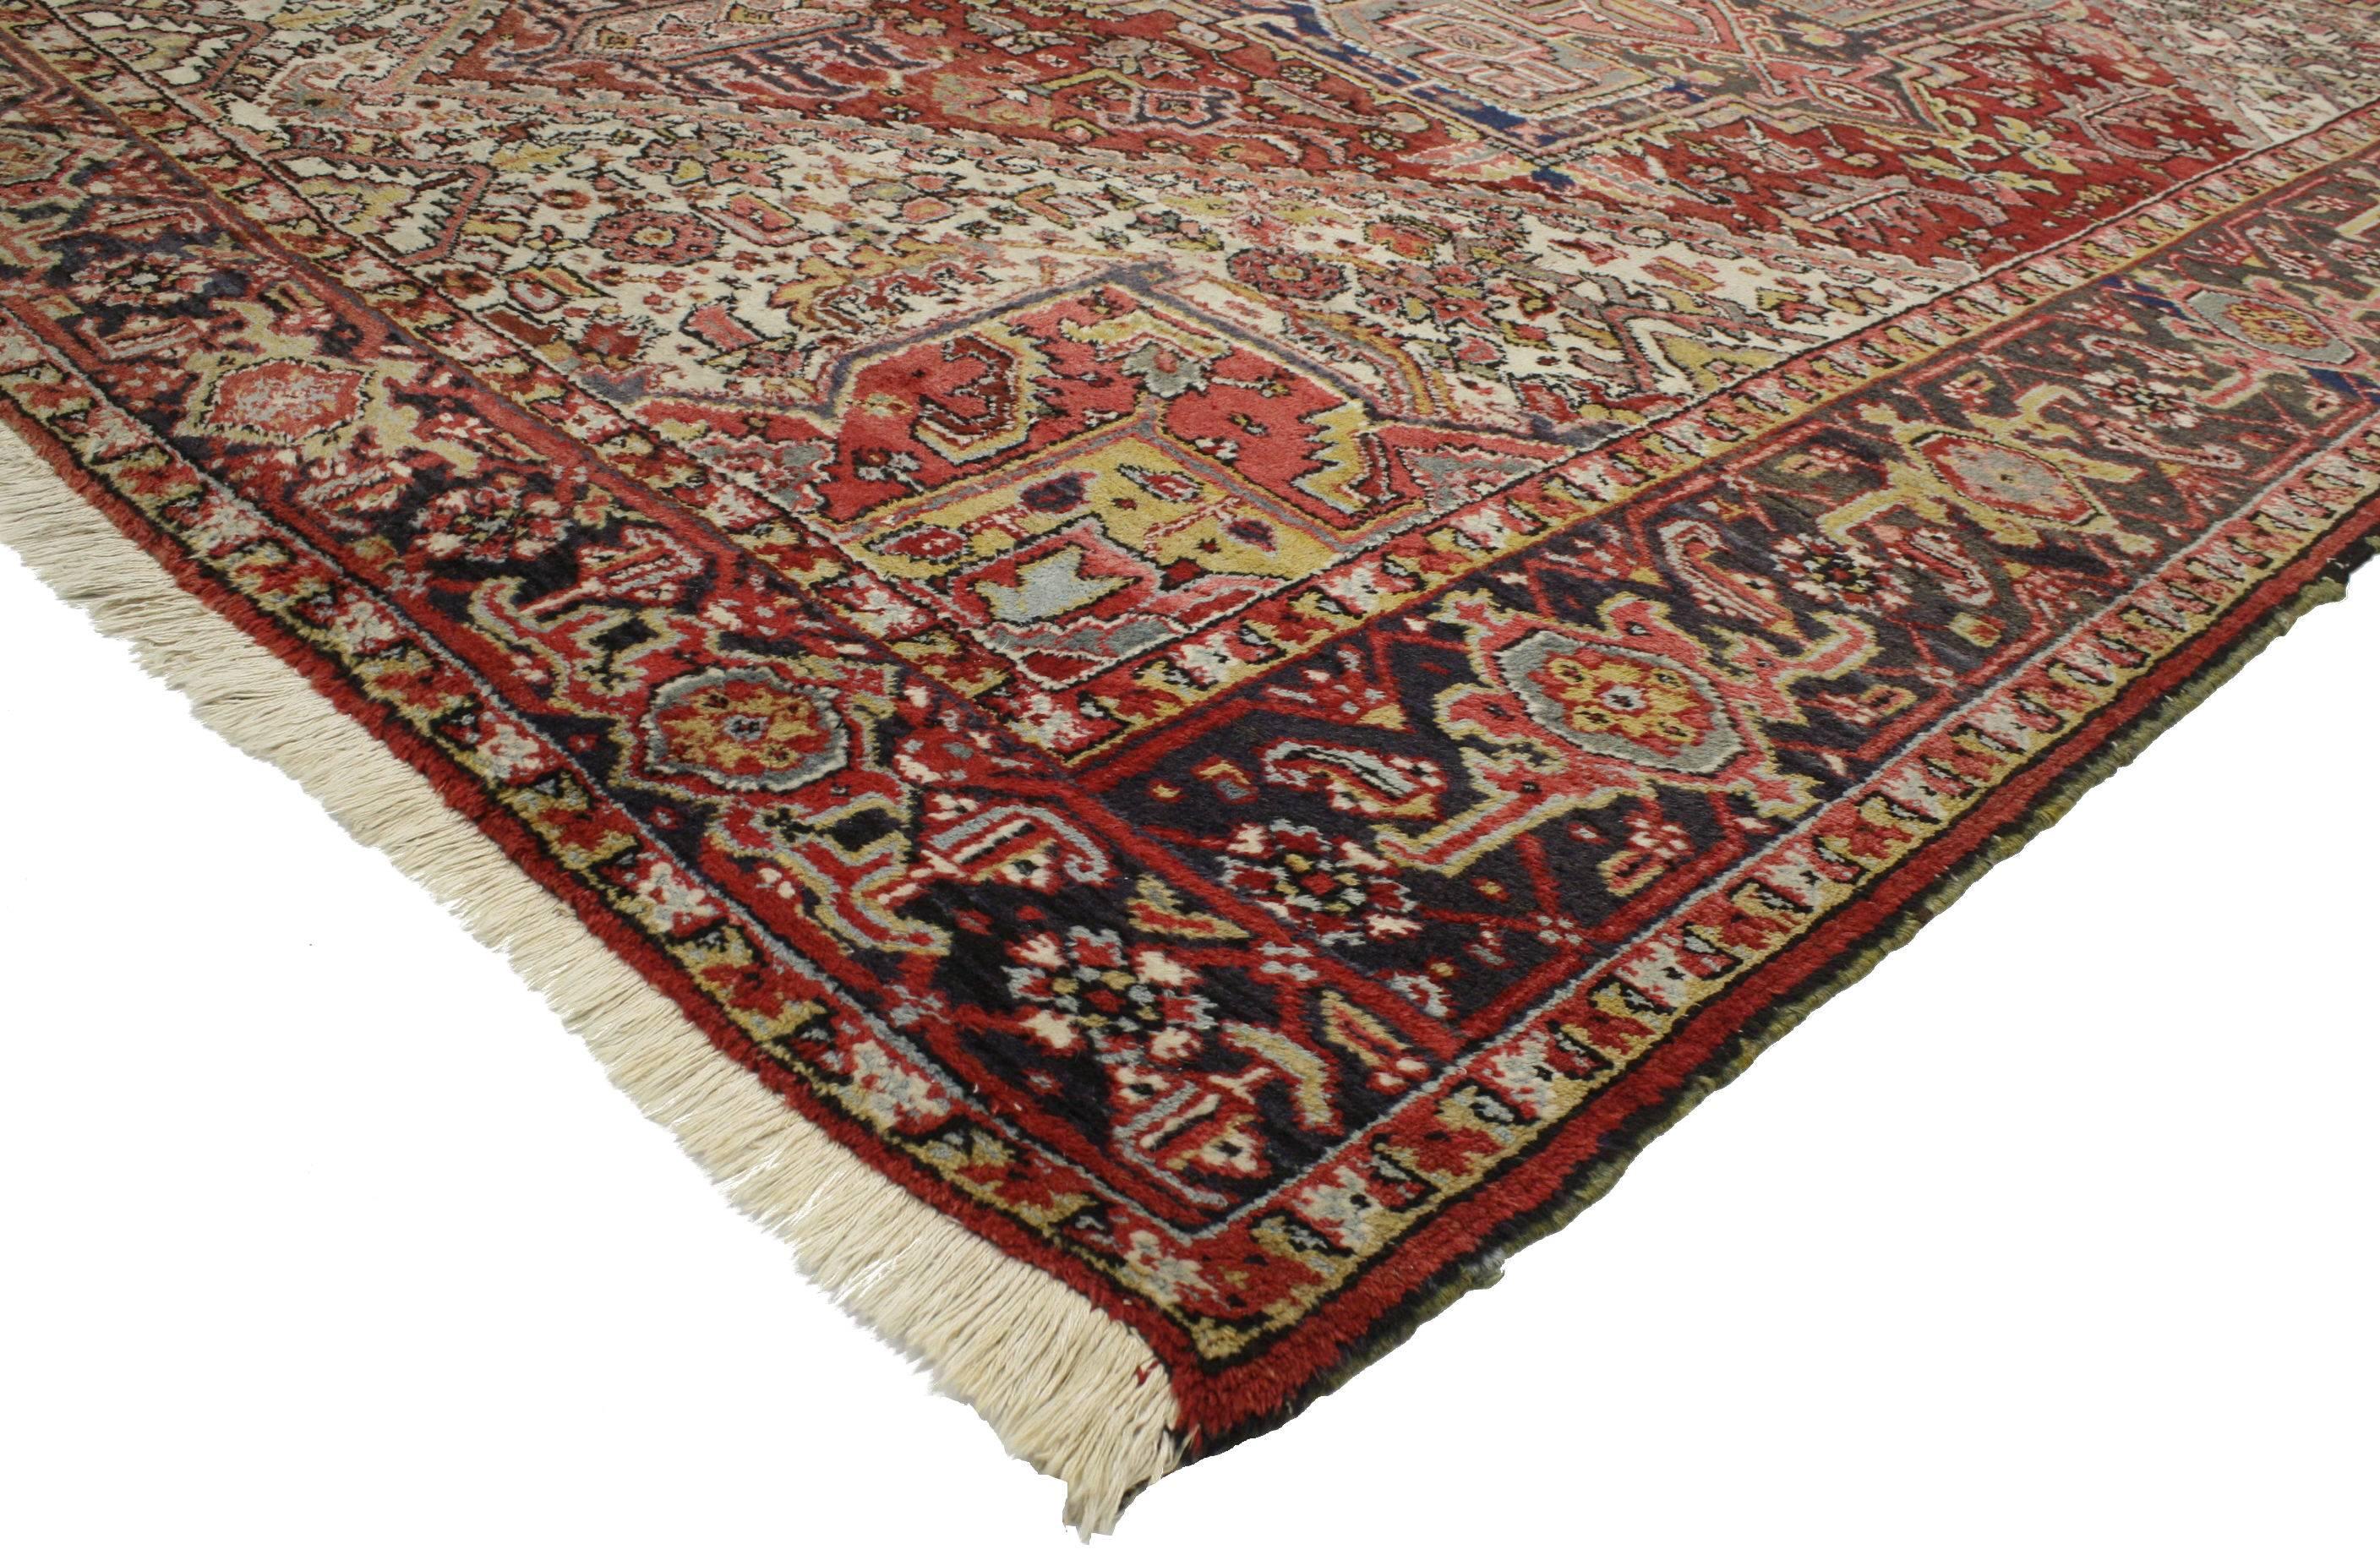 76907 Vintage Persian Heriz Rug with Mid-Century Modern Style. With timeless appeal, refined colors, and architectural design elements, this hand knotted wool vintage Persian Heriz rug can beautifully blend contemporary and traditional interiors. It